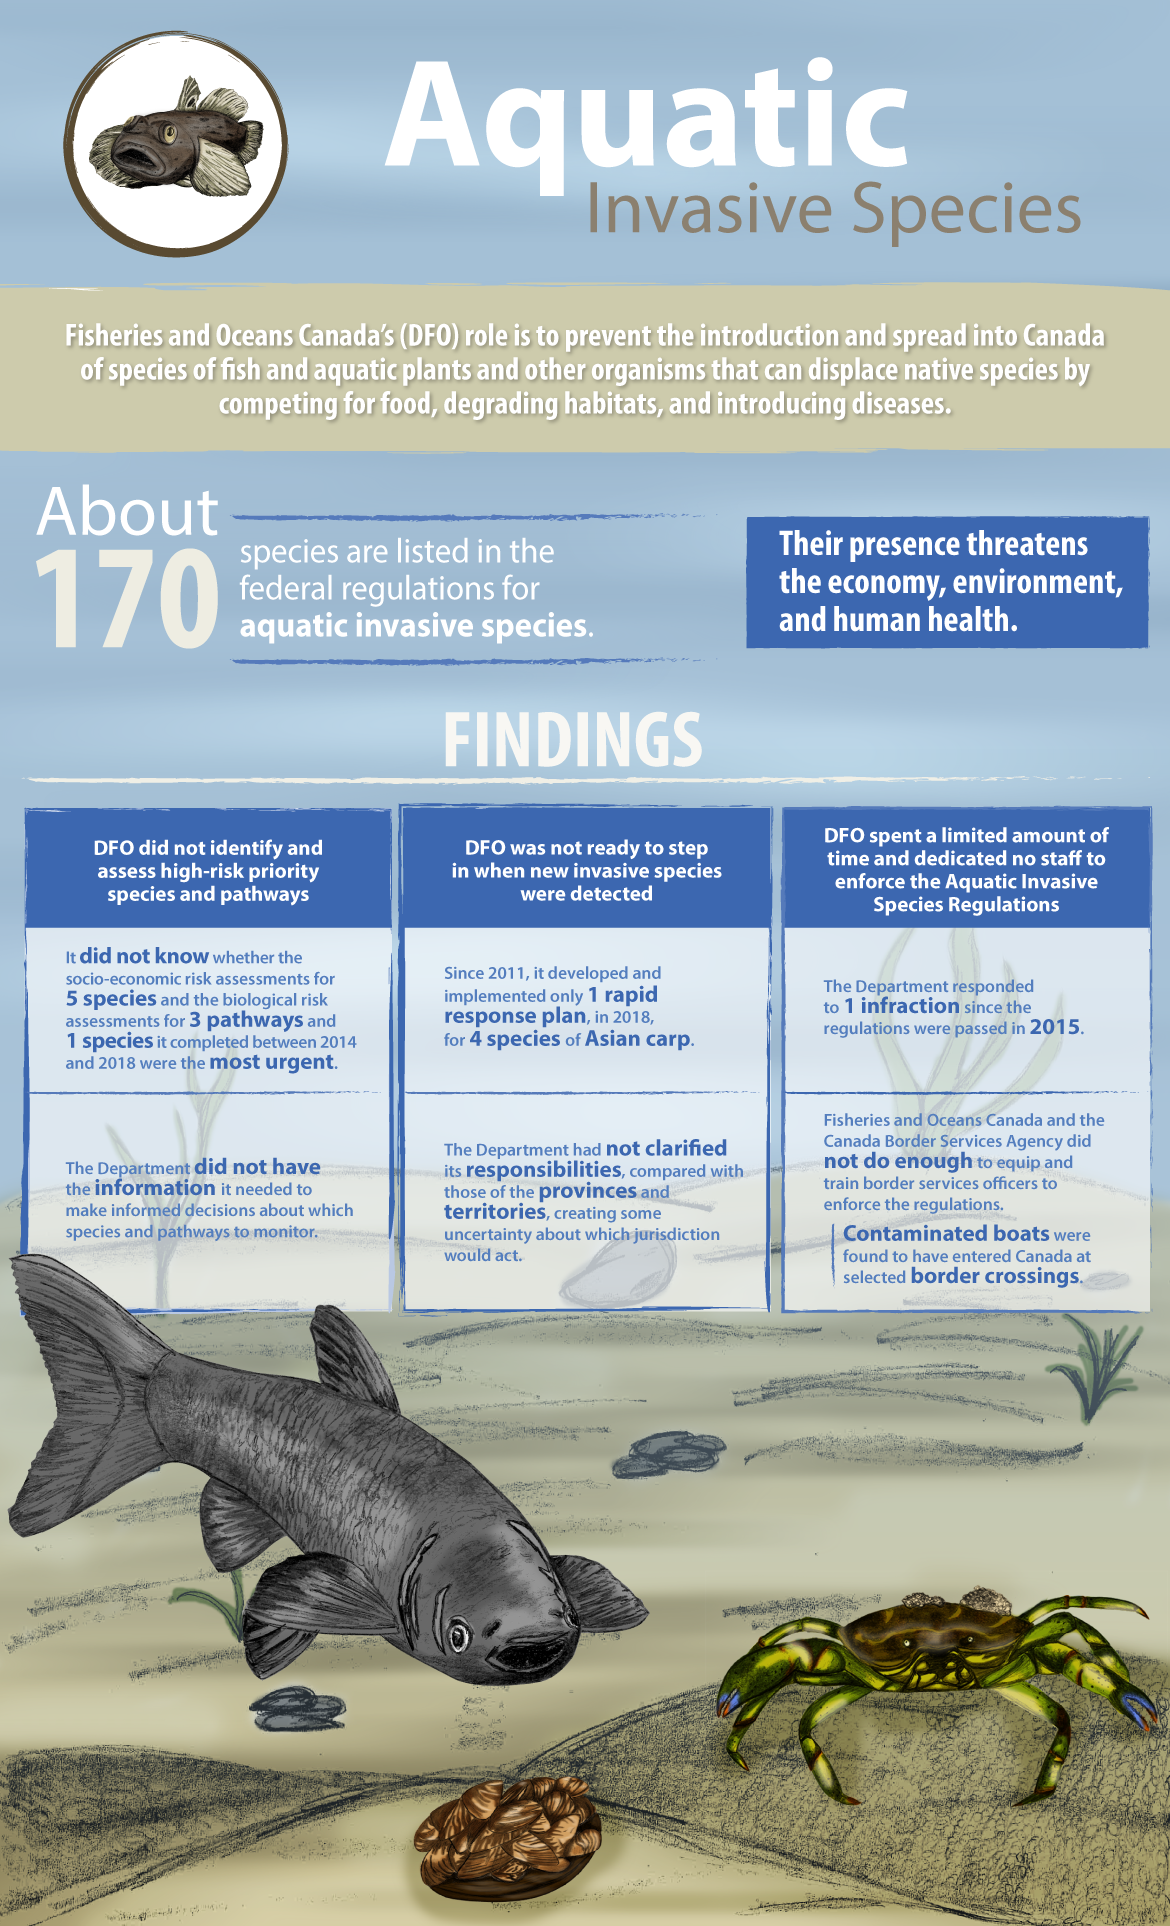 This infographic presents findings from the audit of aquatic invasive species